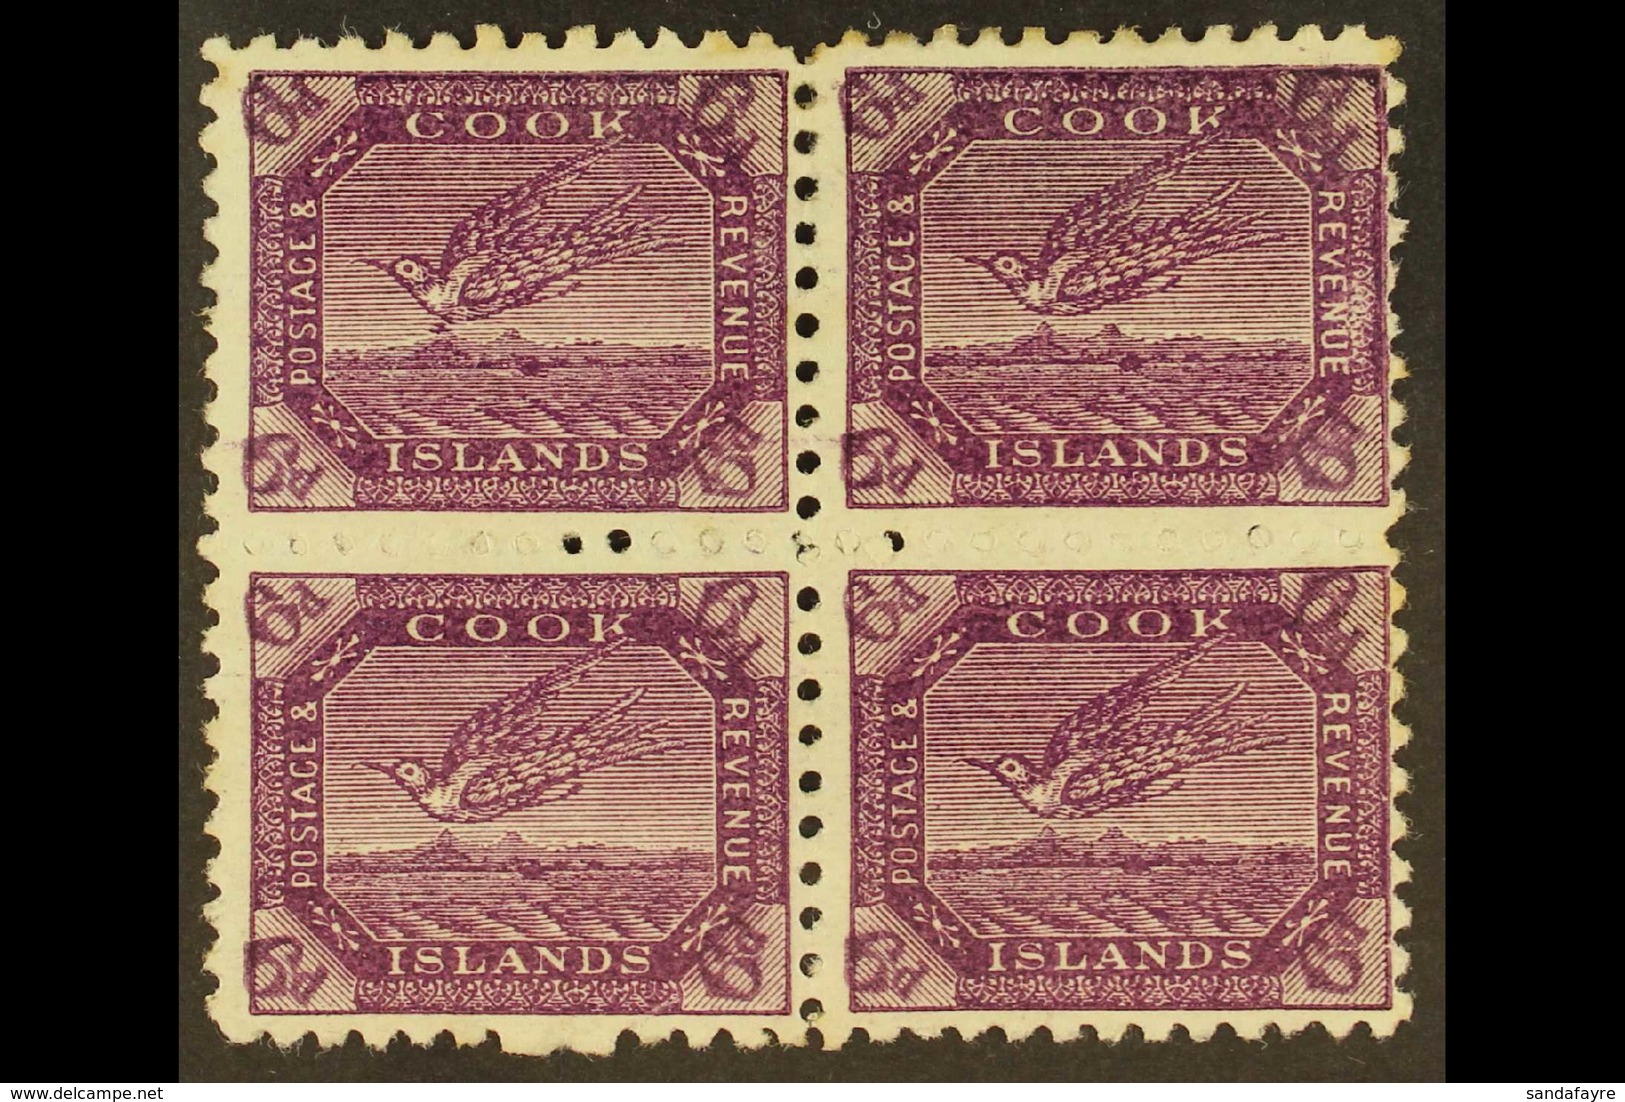 1900 6d Bright Purple Tern, SG 18a, Fine Mint Block Of Four, Incl. R1/9 Coloured Mark Below Bird. For More Images, Pleas - Cook